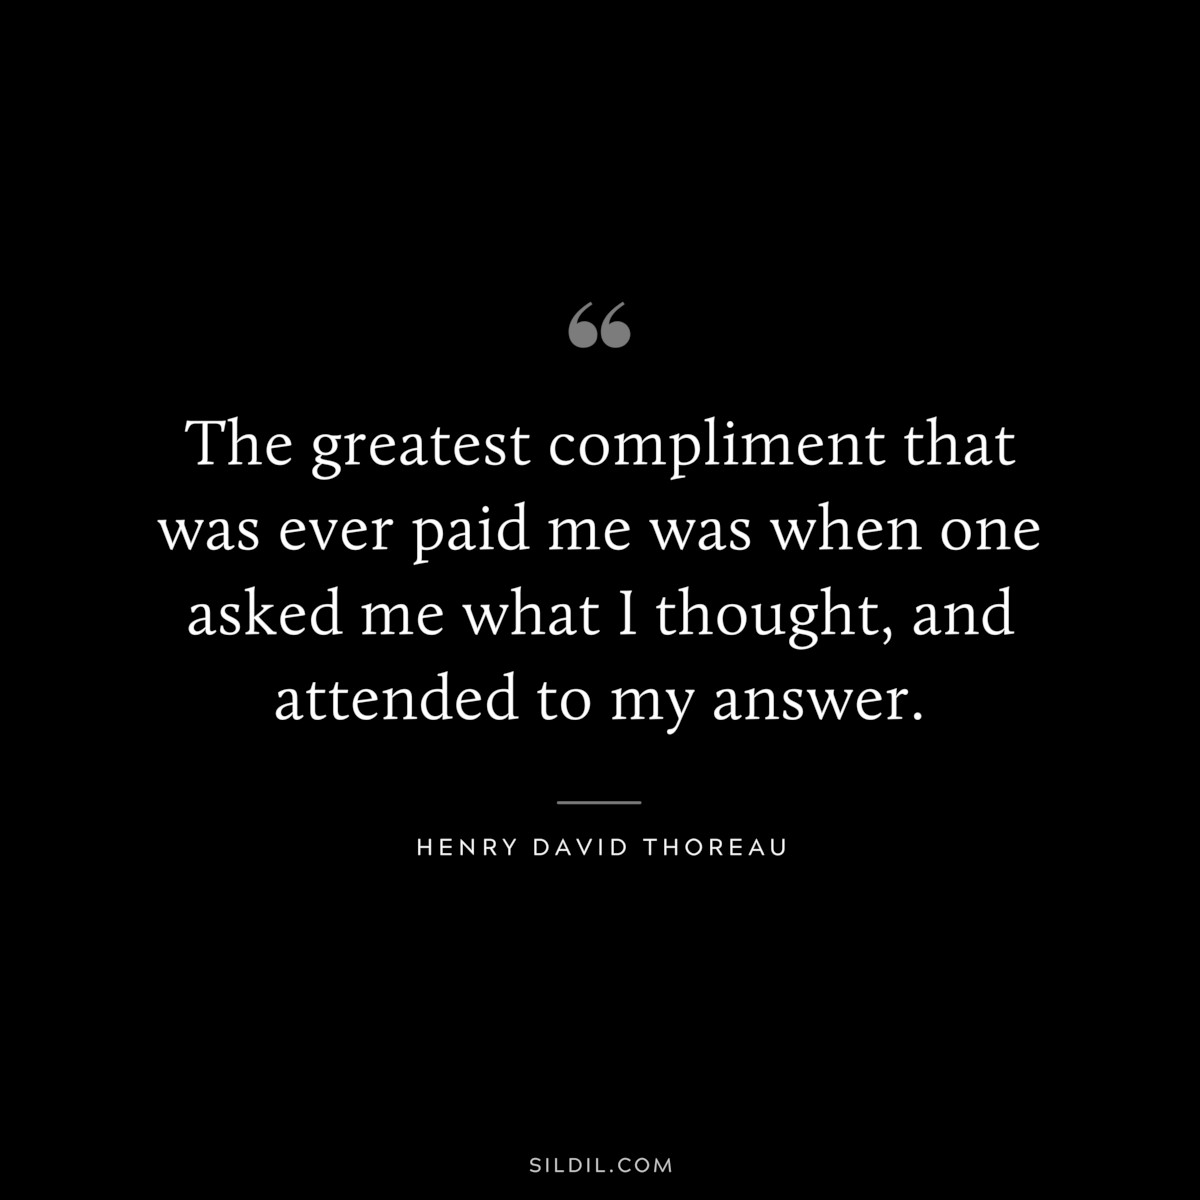 The greatest compliment that was ever paid me was when one asked me what I thought, and attended to my answer. — Henry David Thoreau